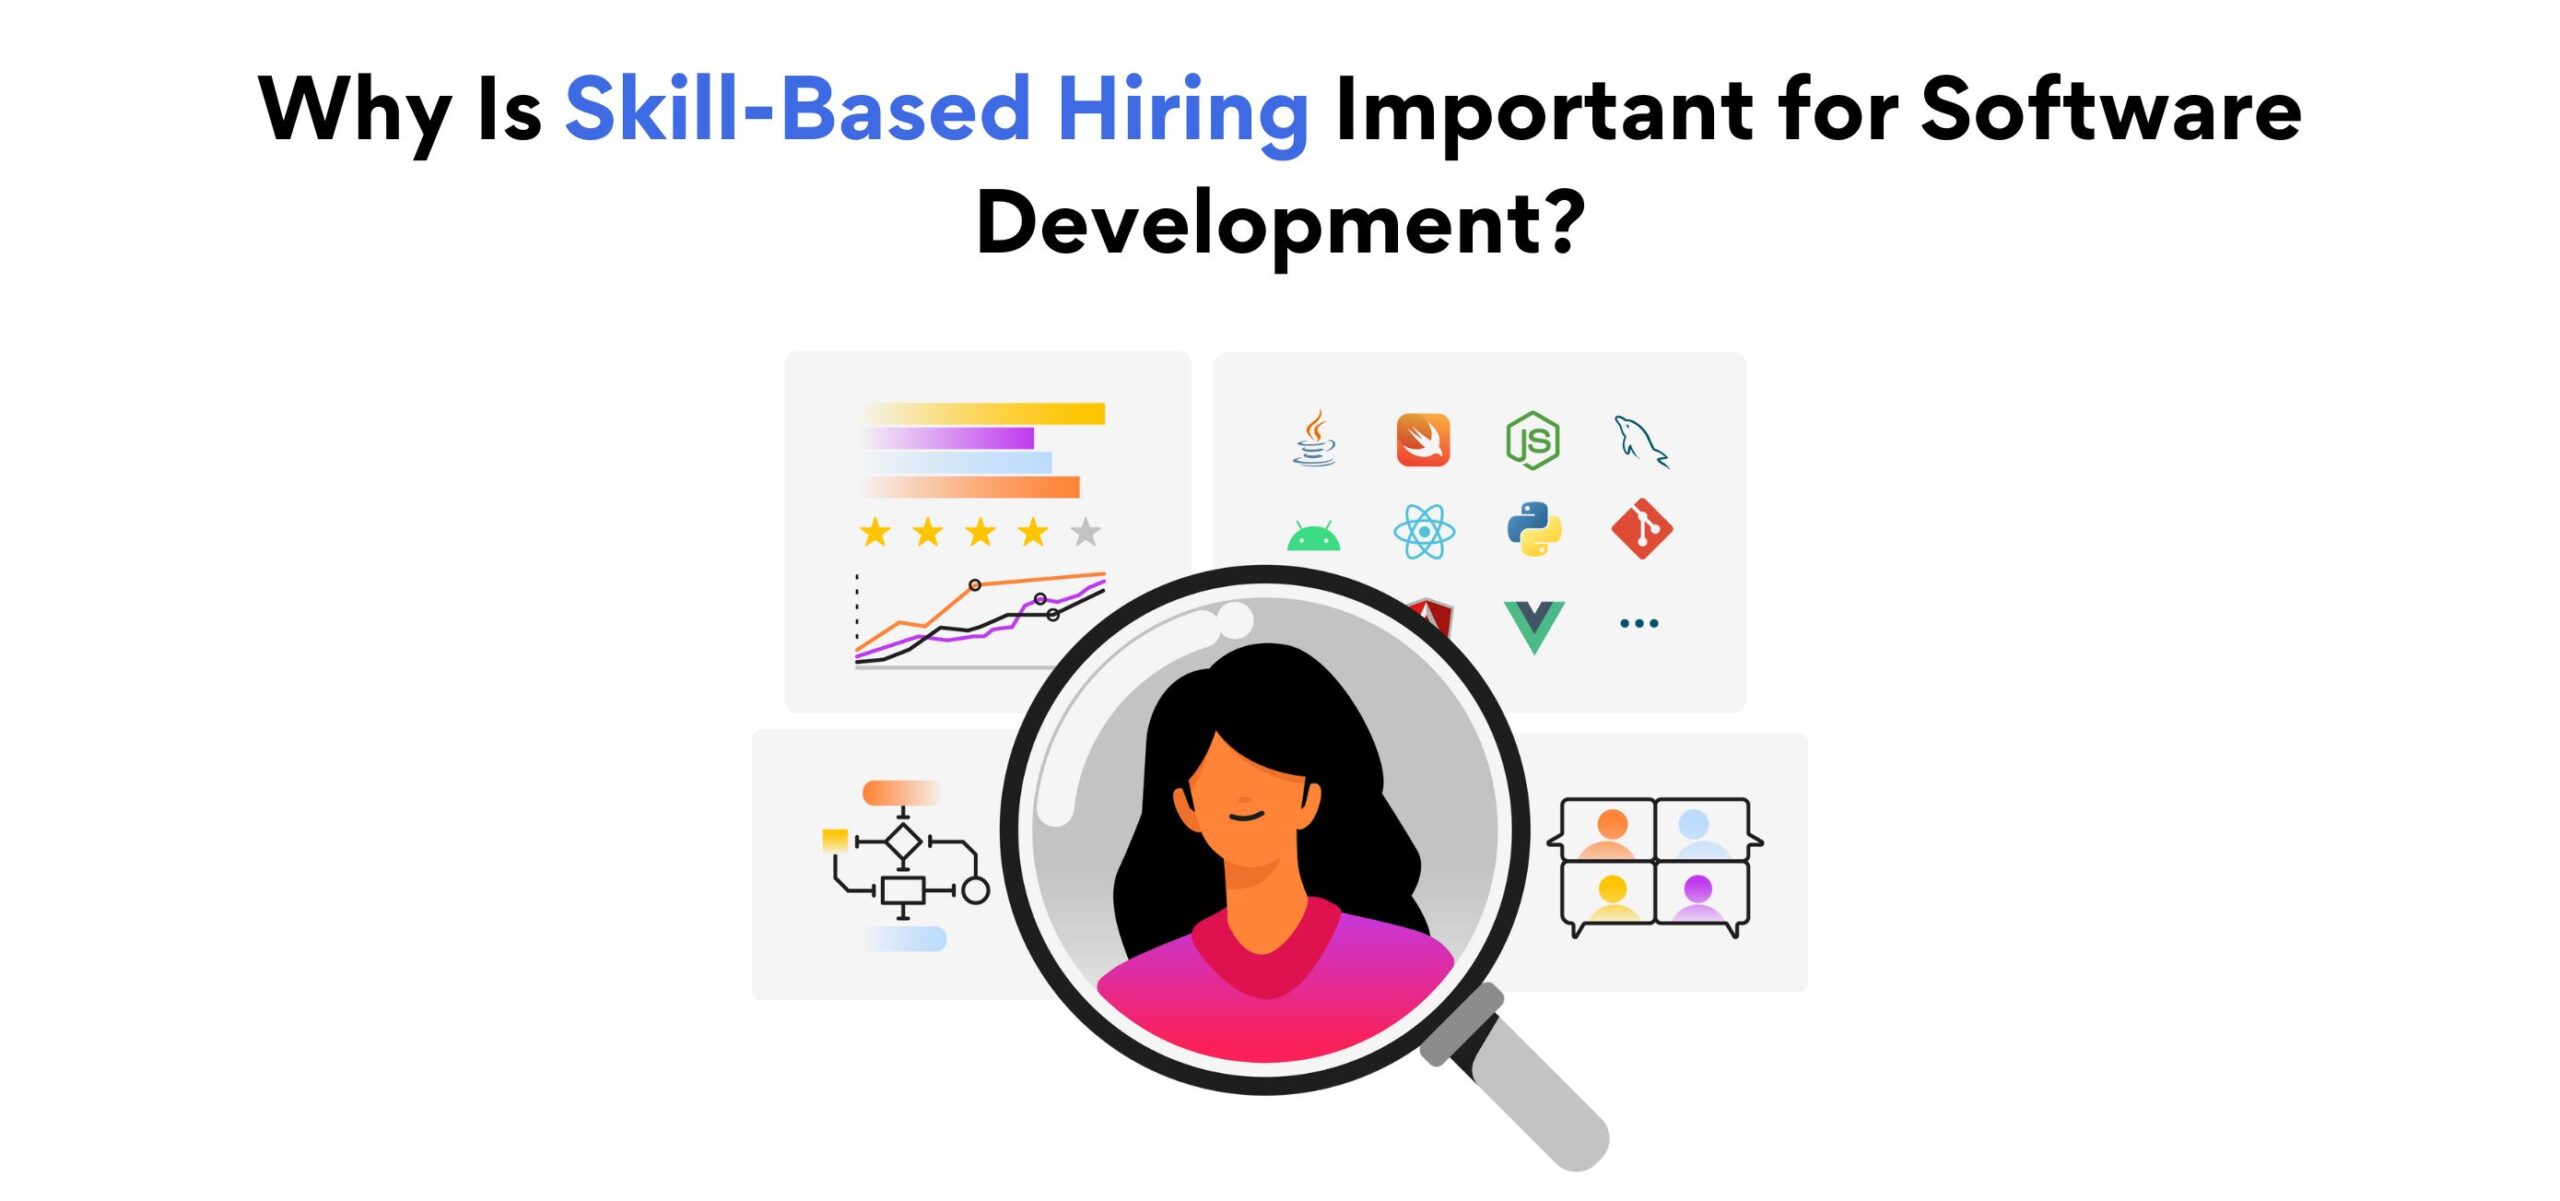 Why Is Skill-Based Hiring Important for Software Development (1)